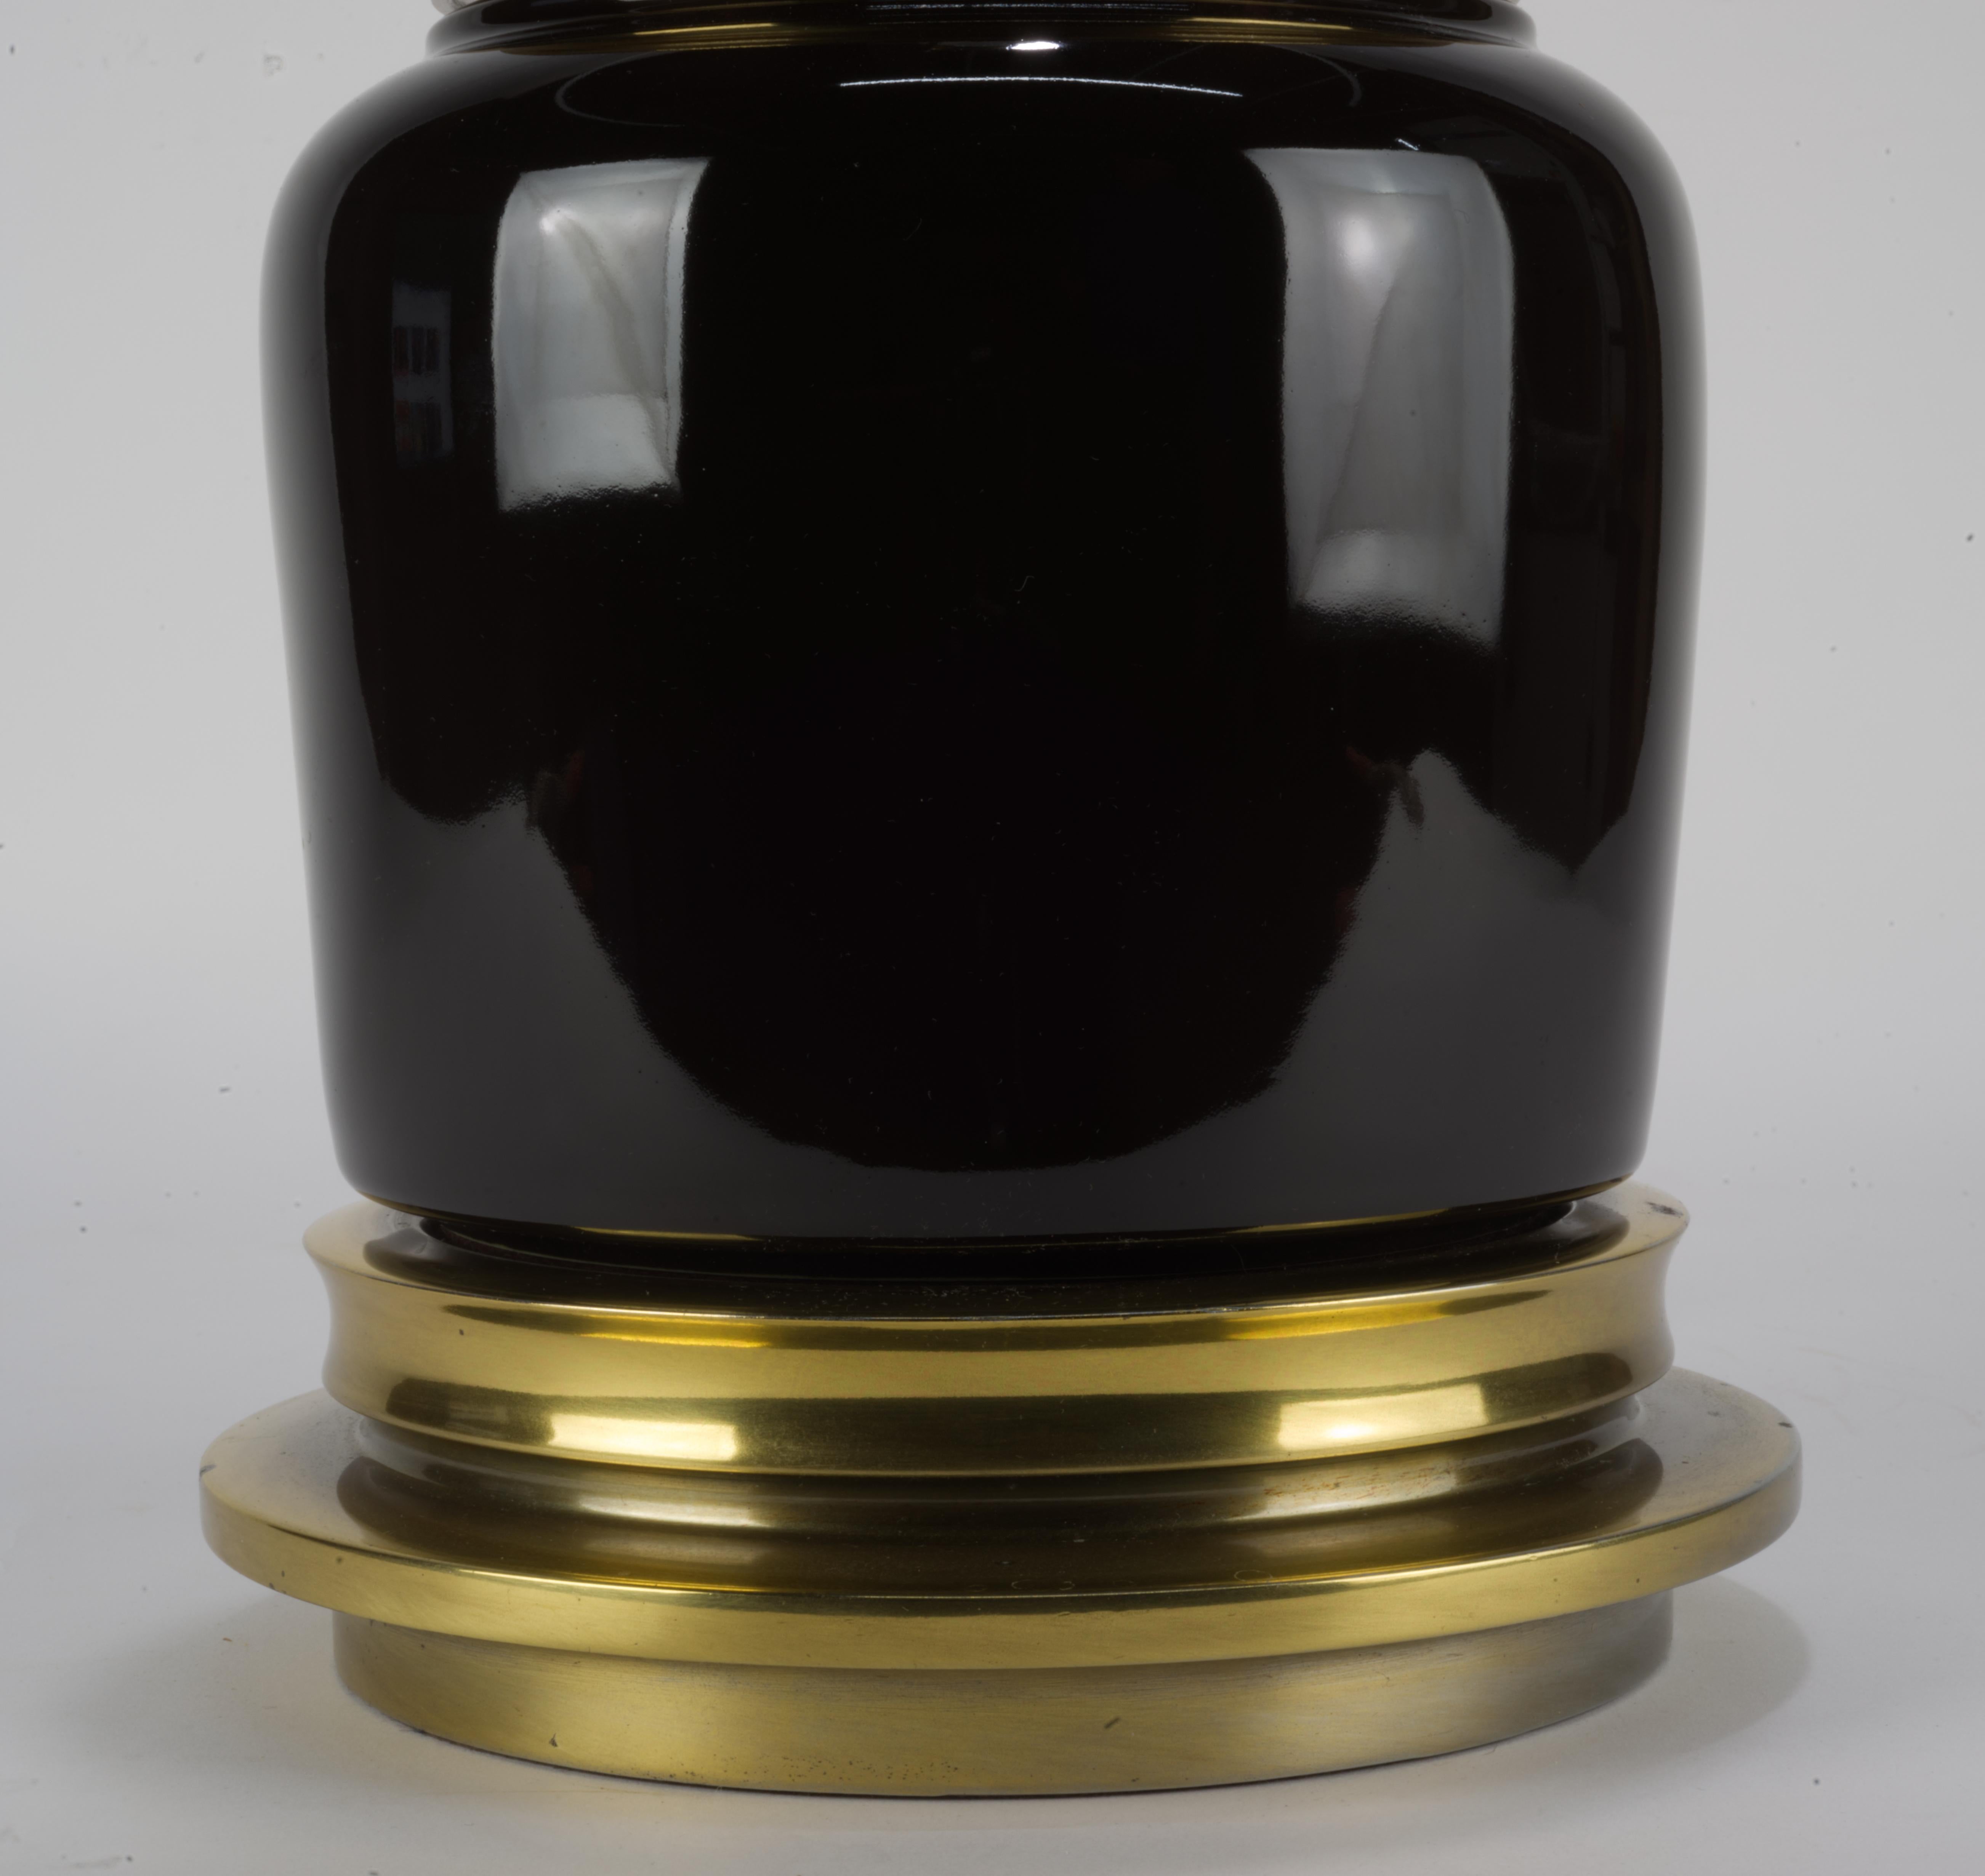 Stiffel Table Lamp, Black Ceramic and Brass, 1940s For Sale 2